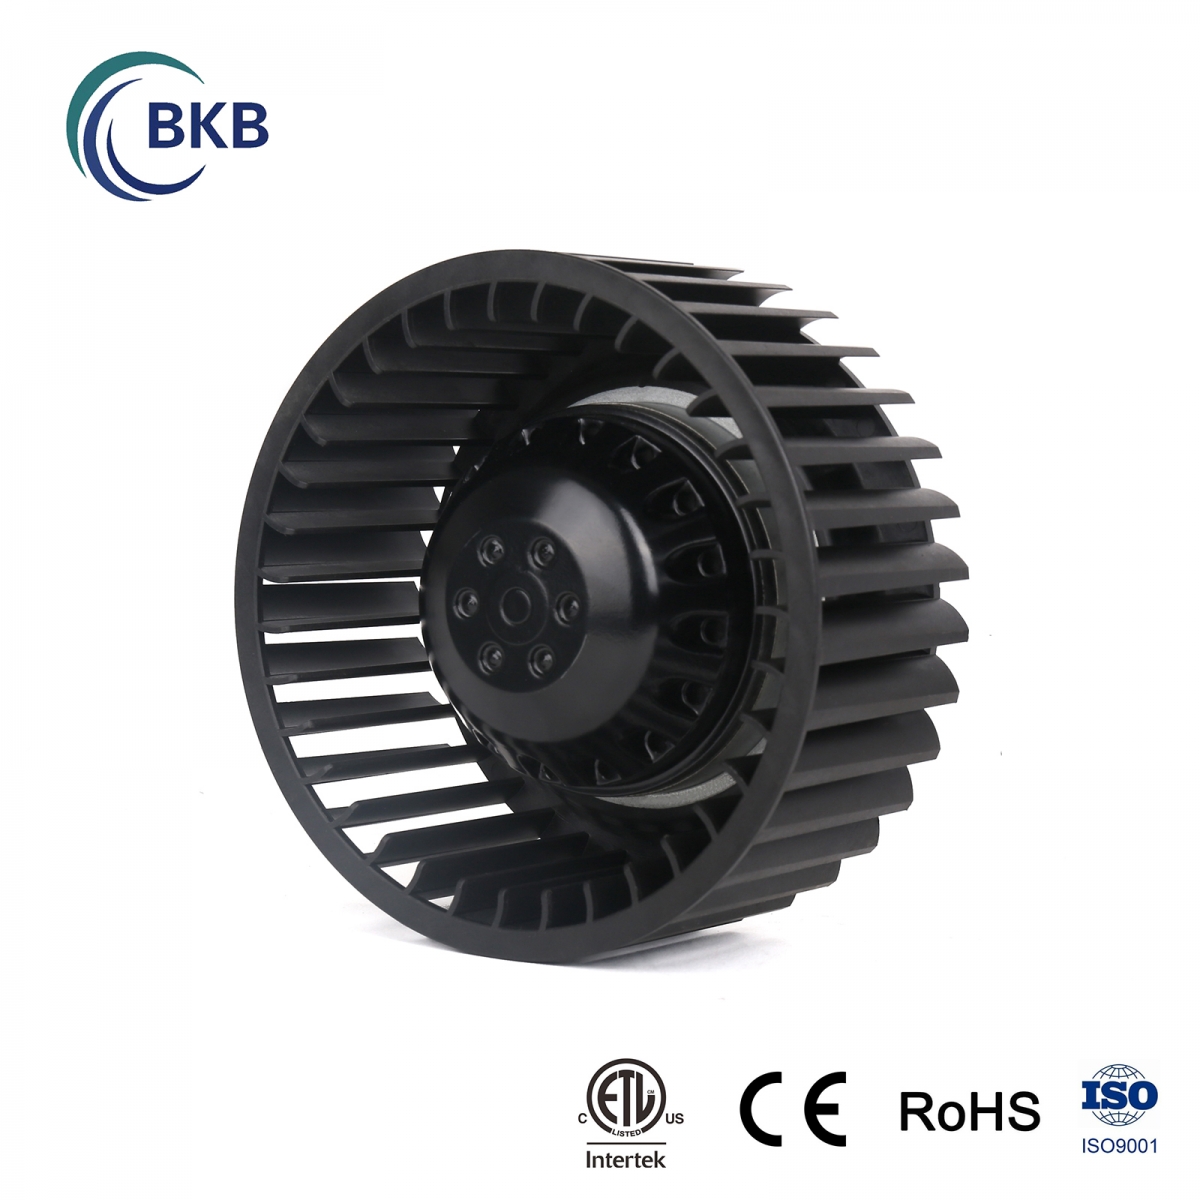 What is the difference between centrifugal fan and duct fan-SUNLIGHT BLOWER,Centrifugal Fans, Inline Fans,Motors,Backward curved centrifugal fans ,Forward curved centrifugal fans ,inlet fans, EC fans